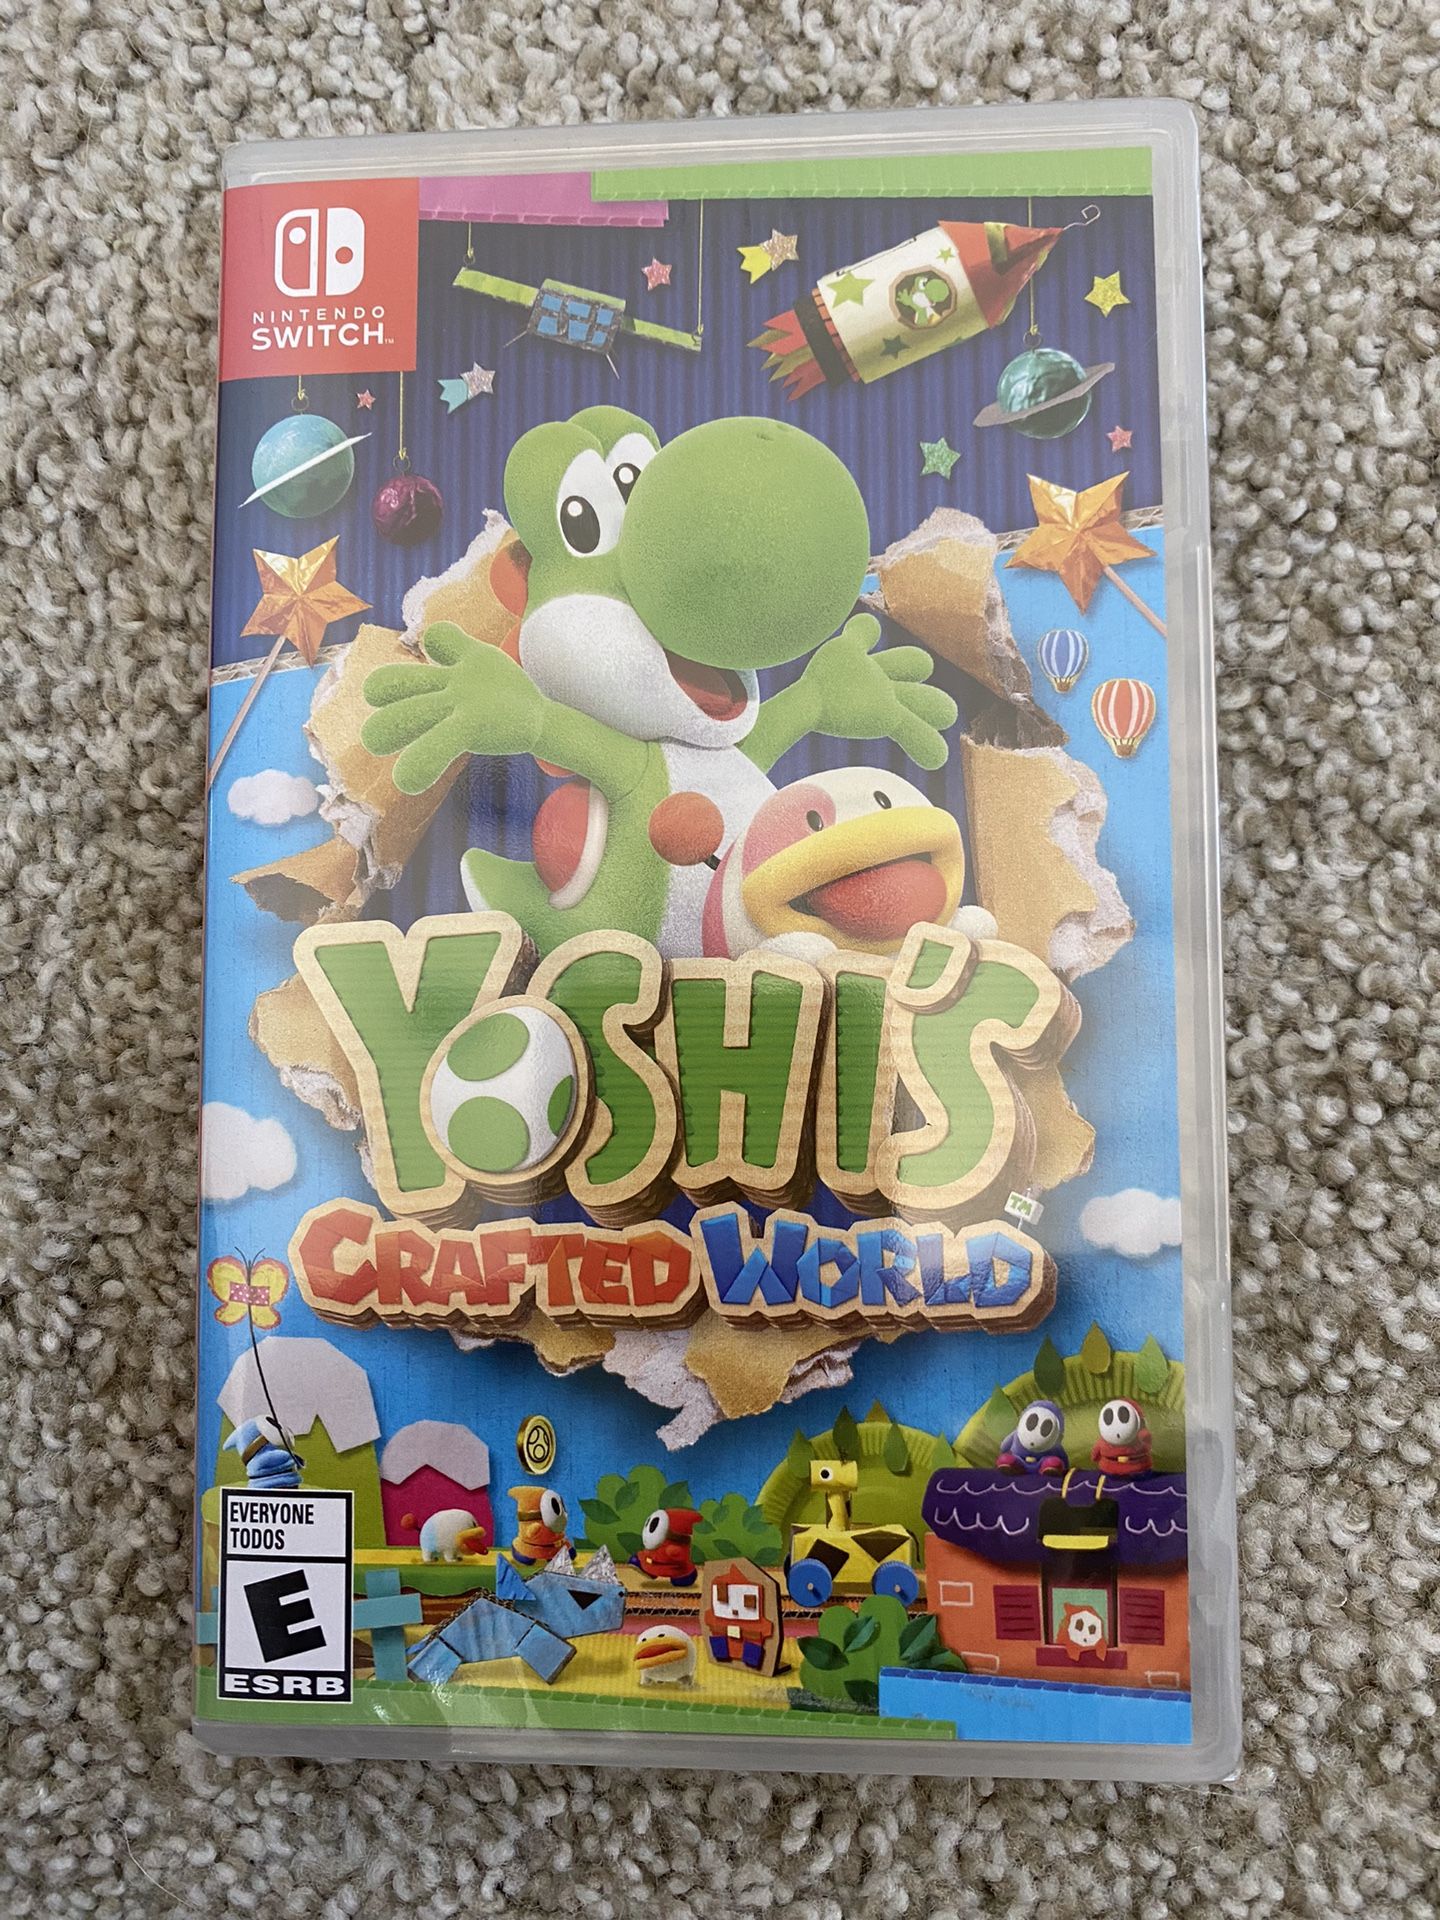 Yoshi's Crafted World, Nintendo Switch, [Physical Edition]